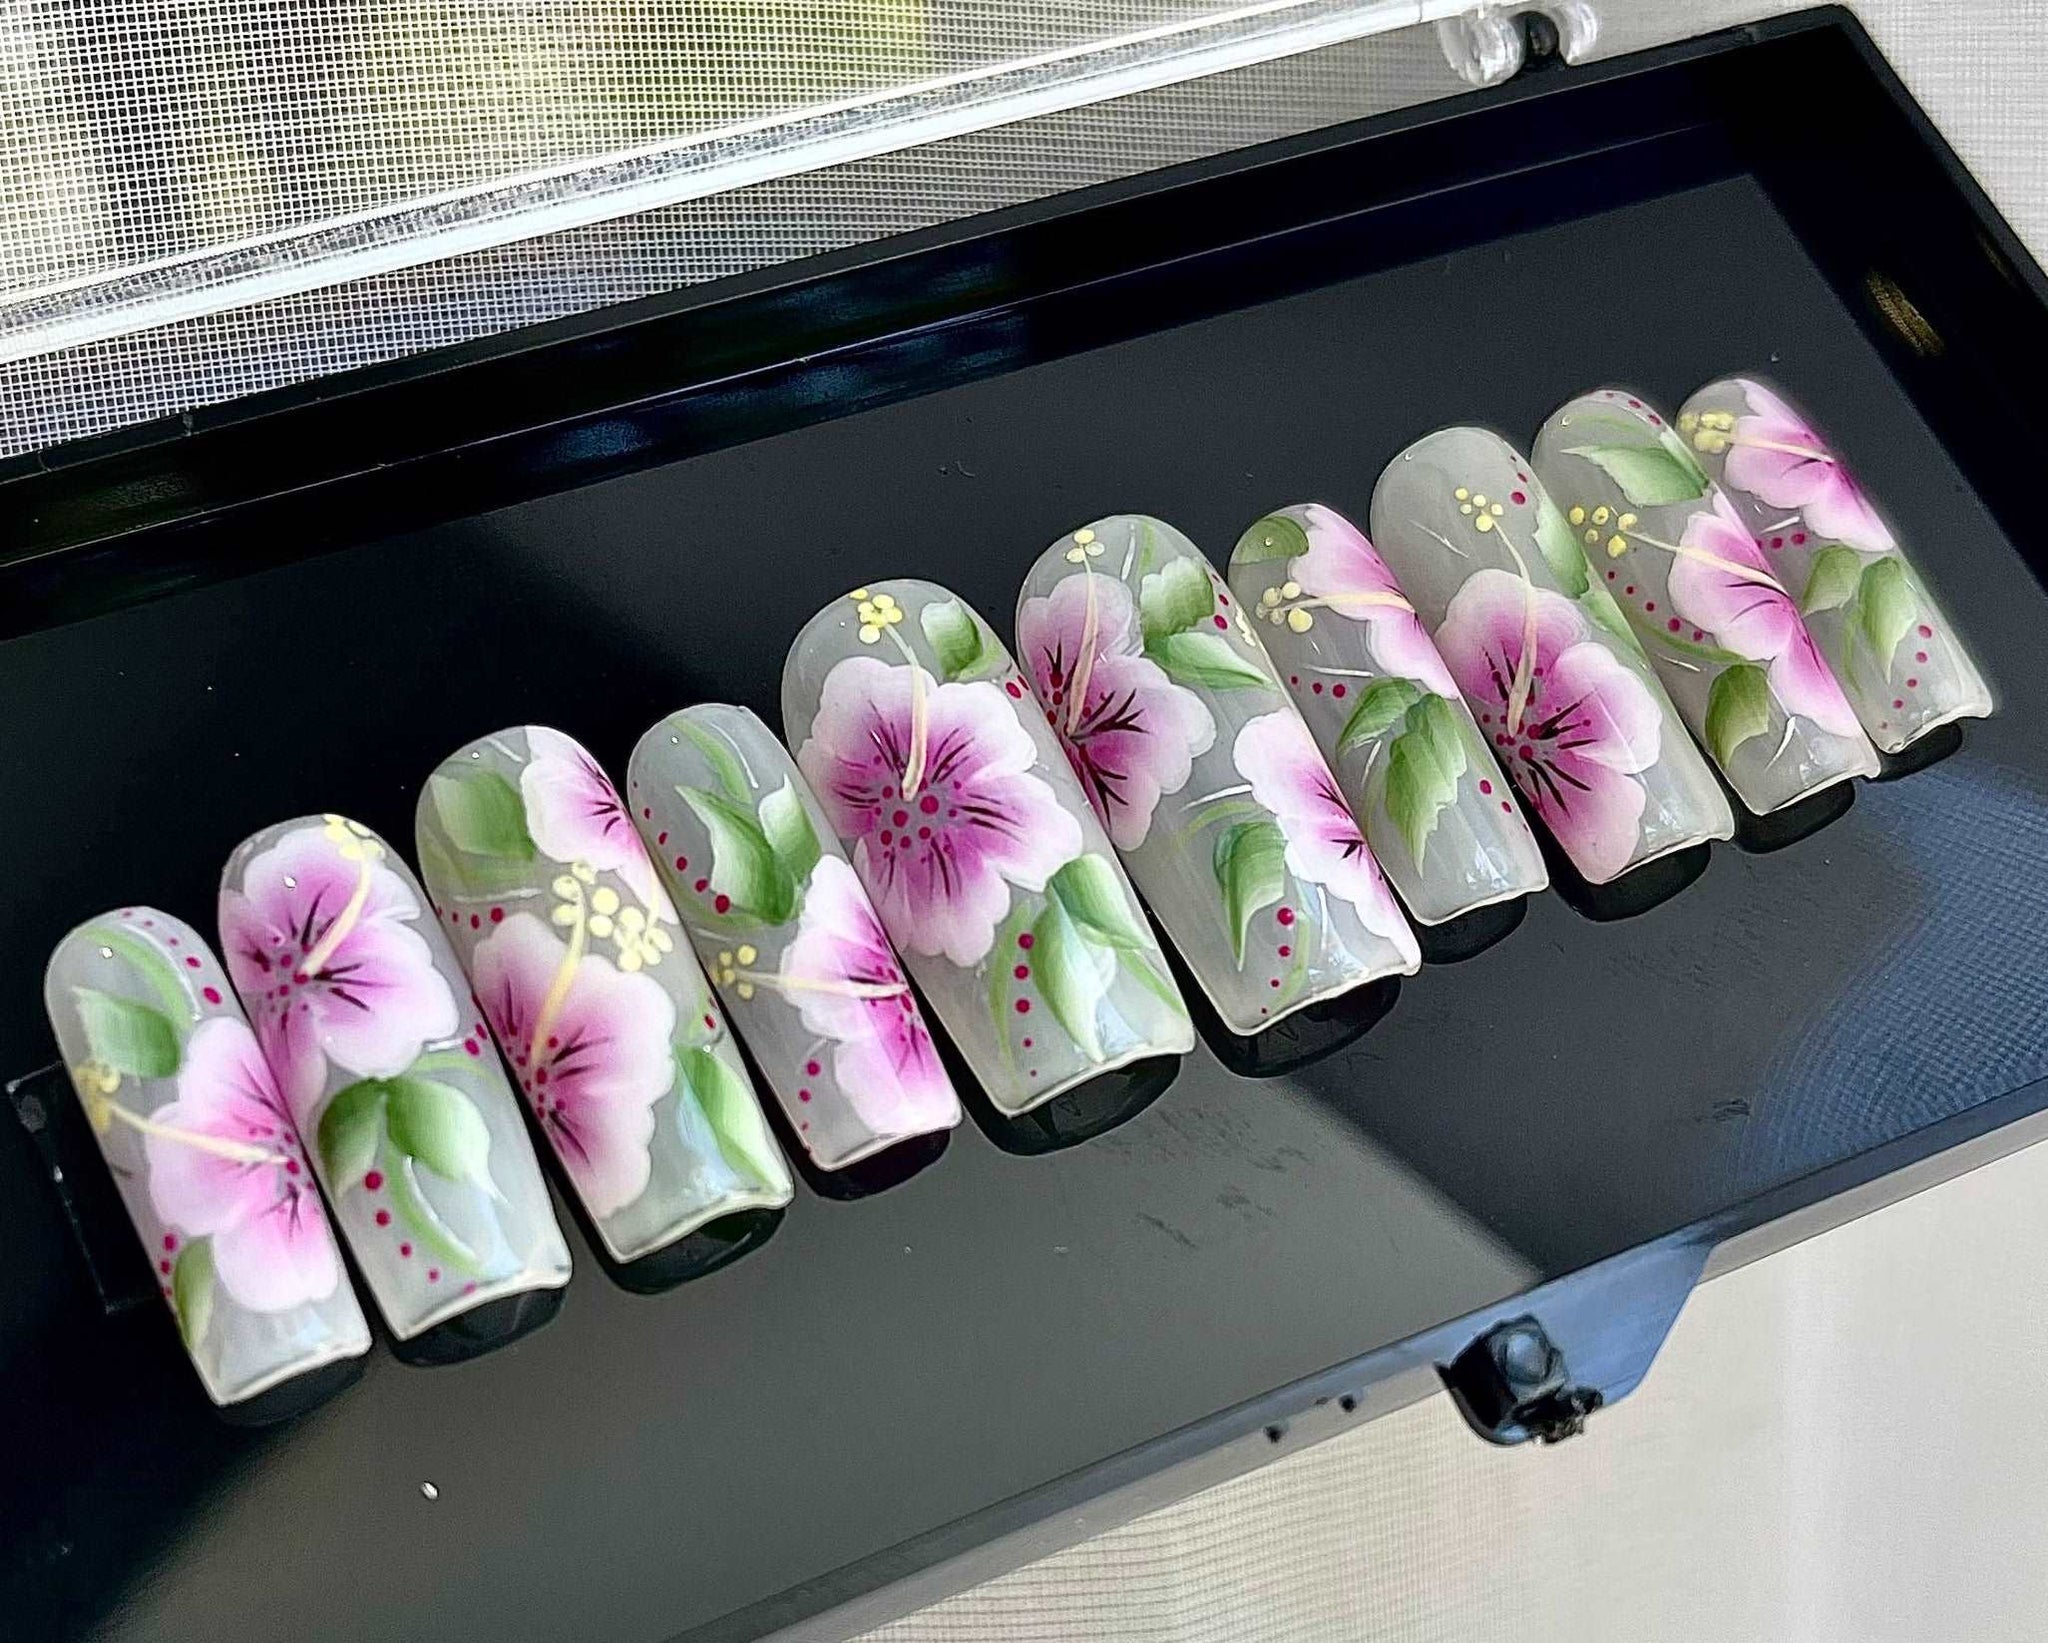 Flowers Press on Nails - Reusable Pink & Green Design